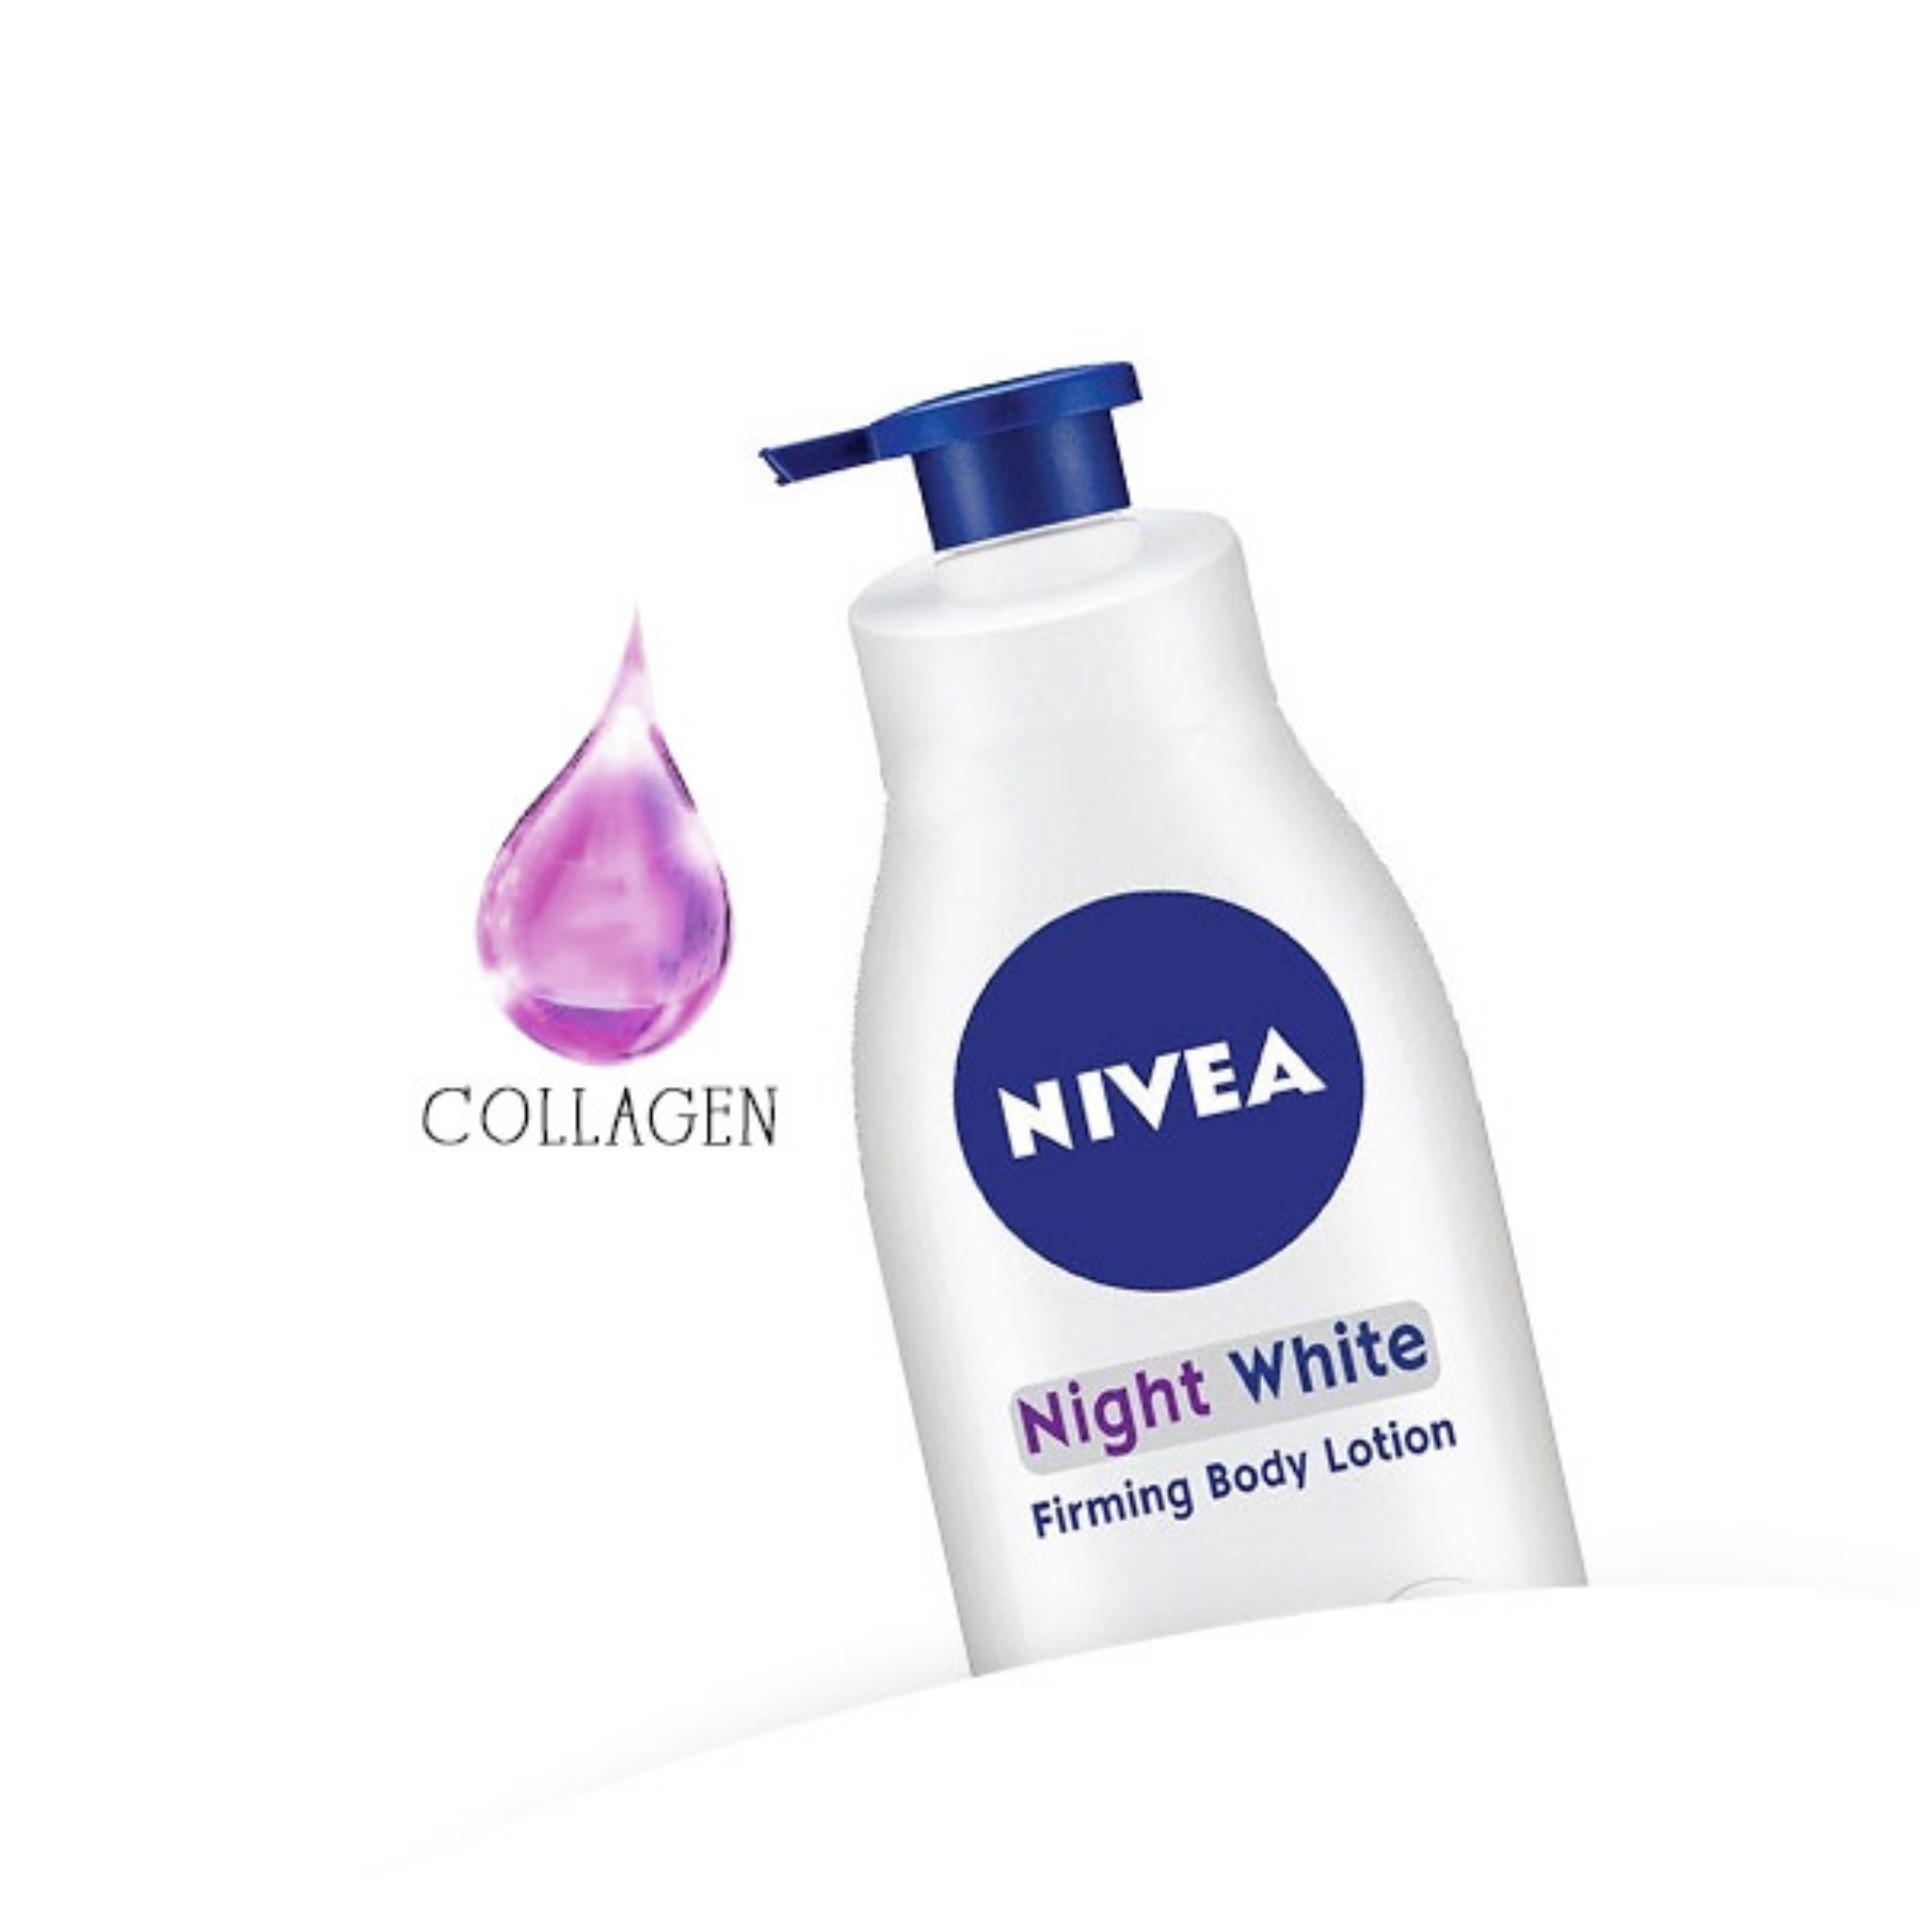 Nivea Night White Firming Body Lotion review